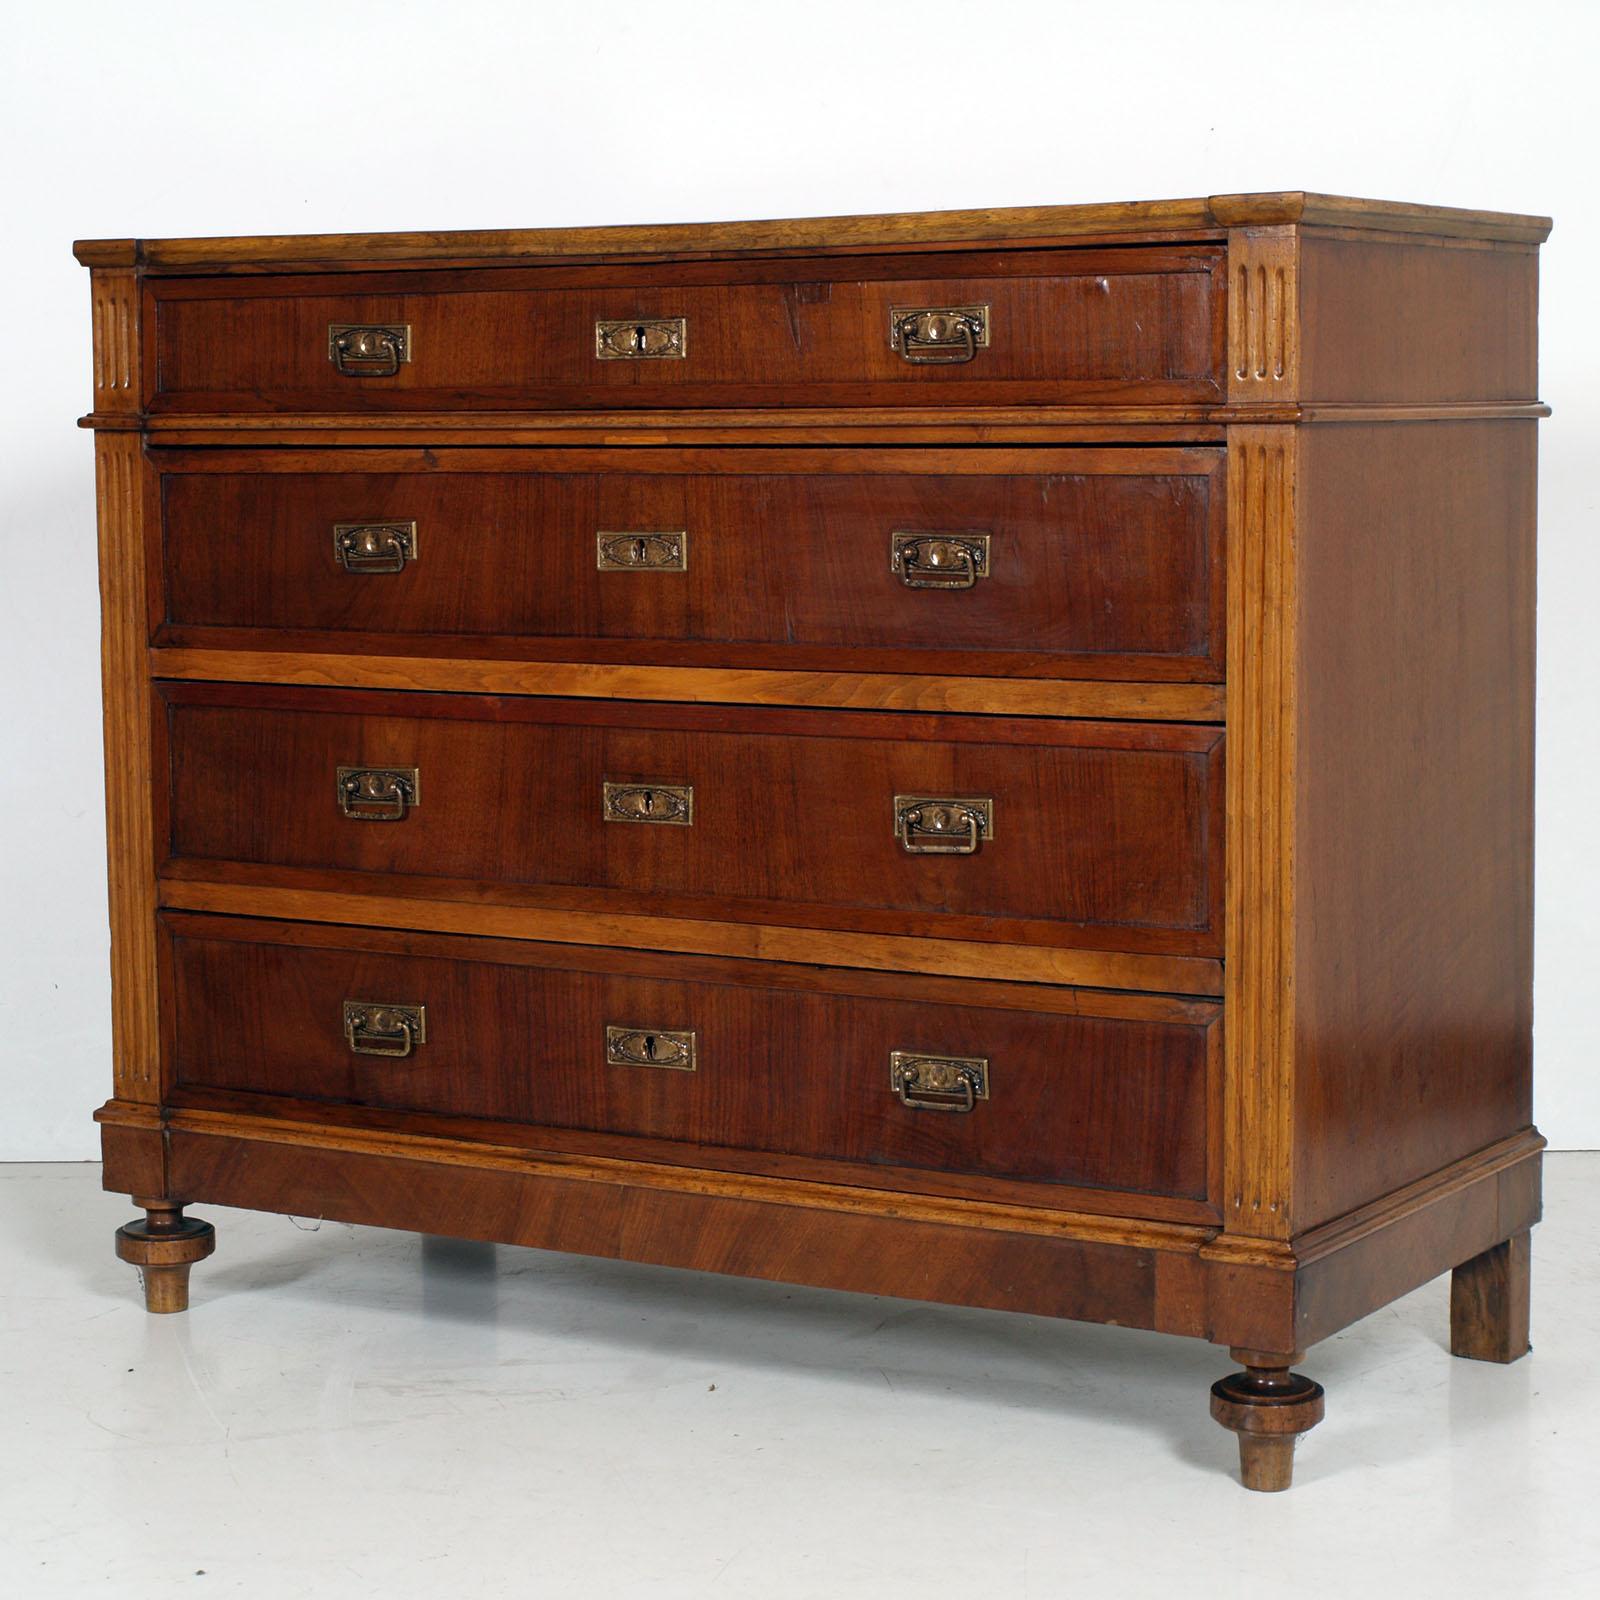 Late 19th Century Last 19th Century Commode Chest of Drawers, Walnut, Restored and Polished to Wax